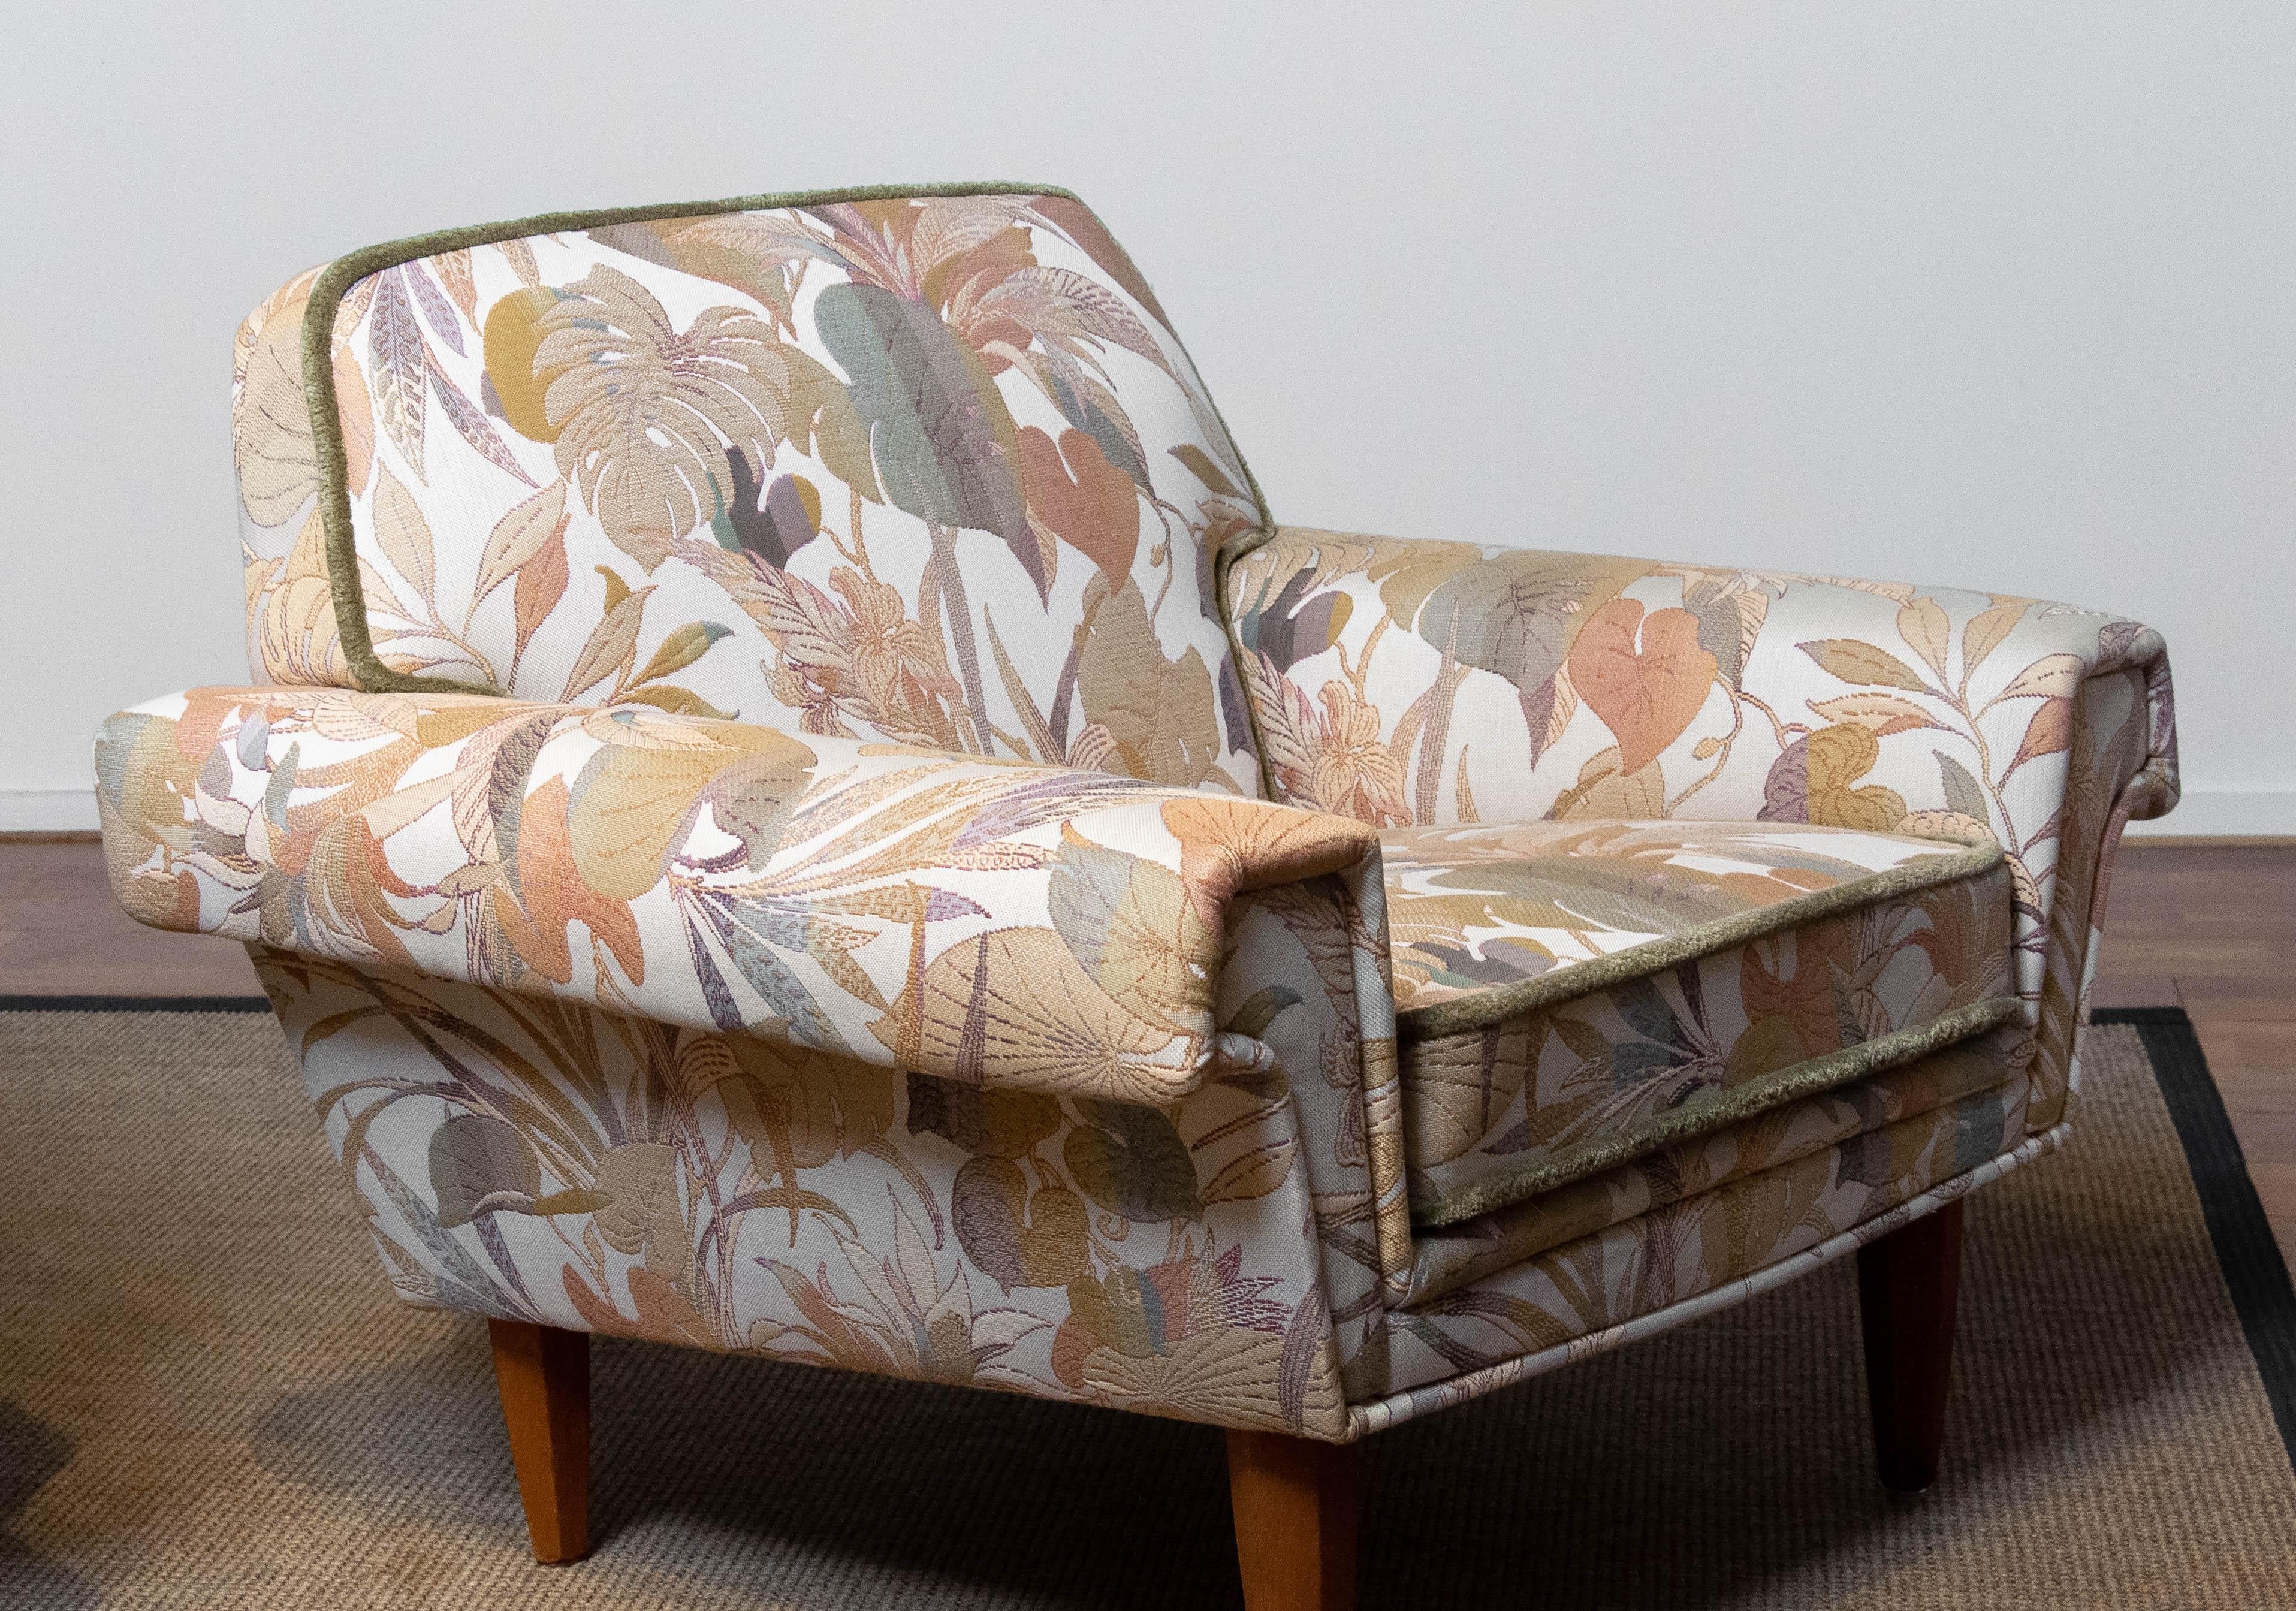 Pair Low Back Lounge Chairs Upholstered Floral Jacquard Fabric From Denmark 1970 For Sale 3